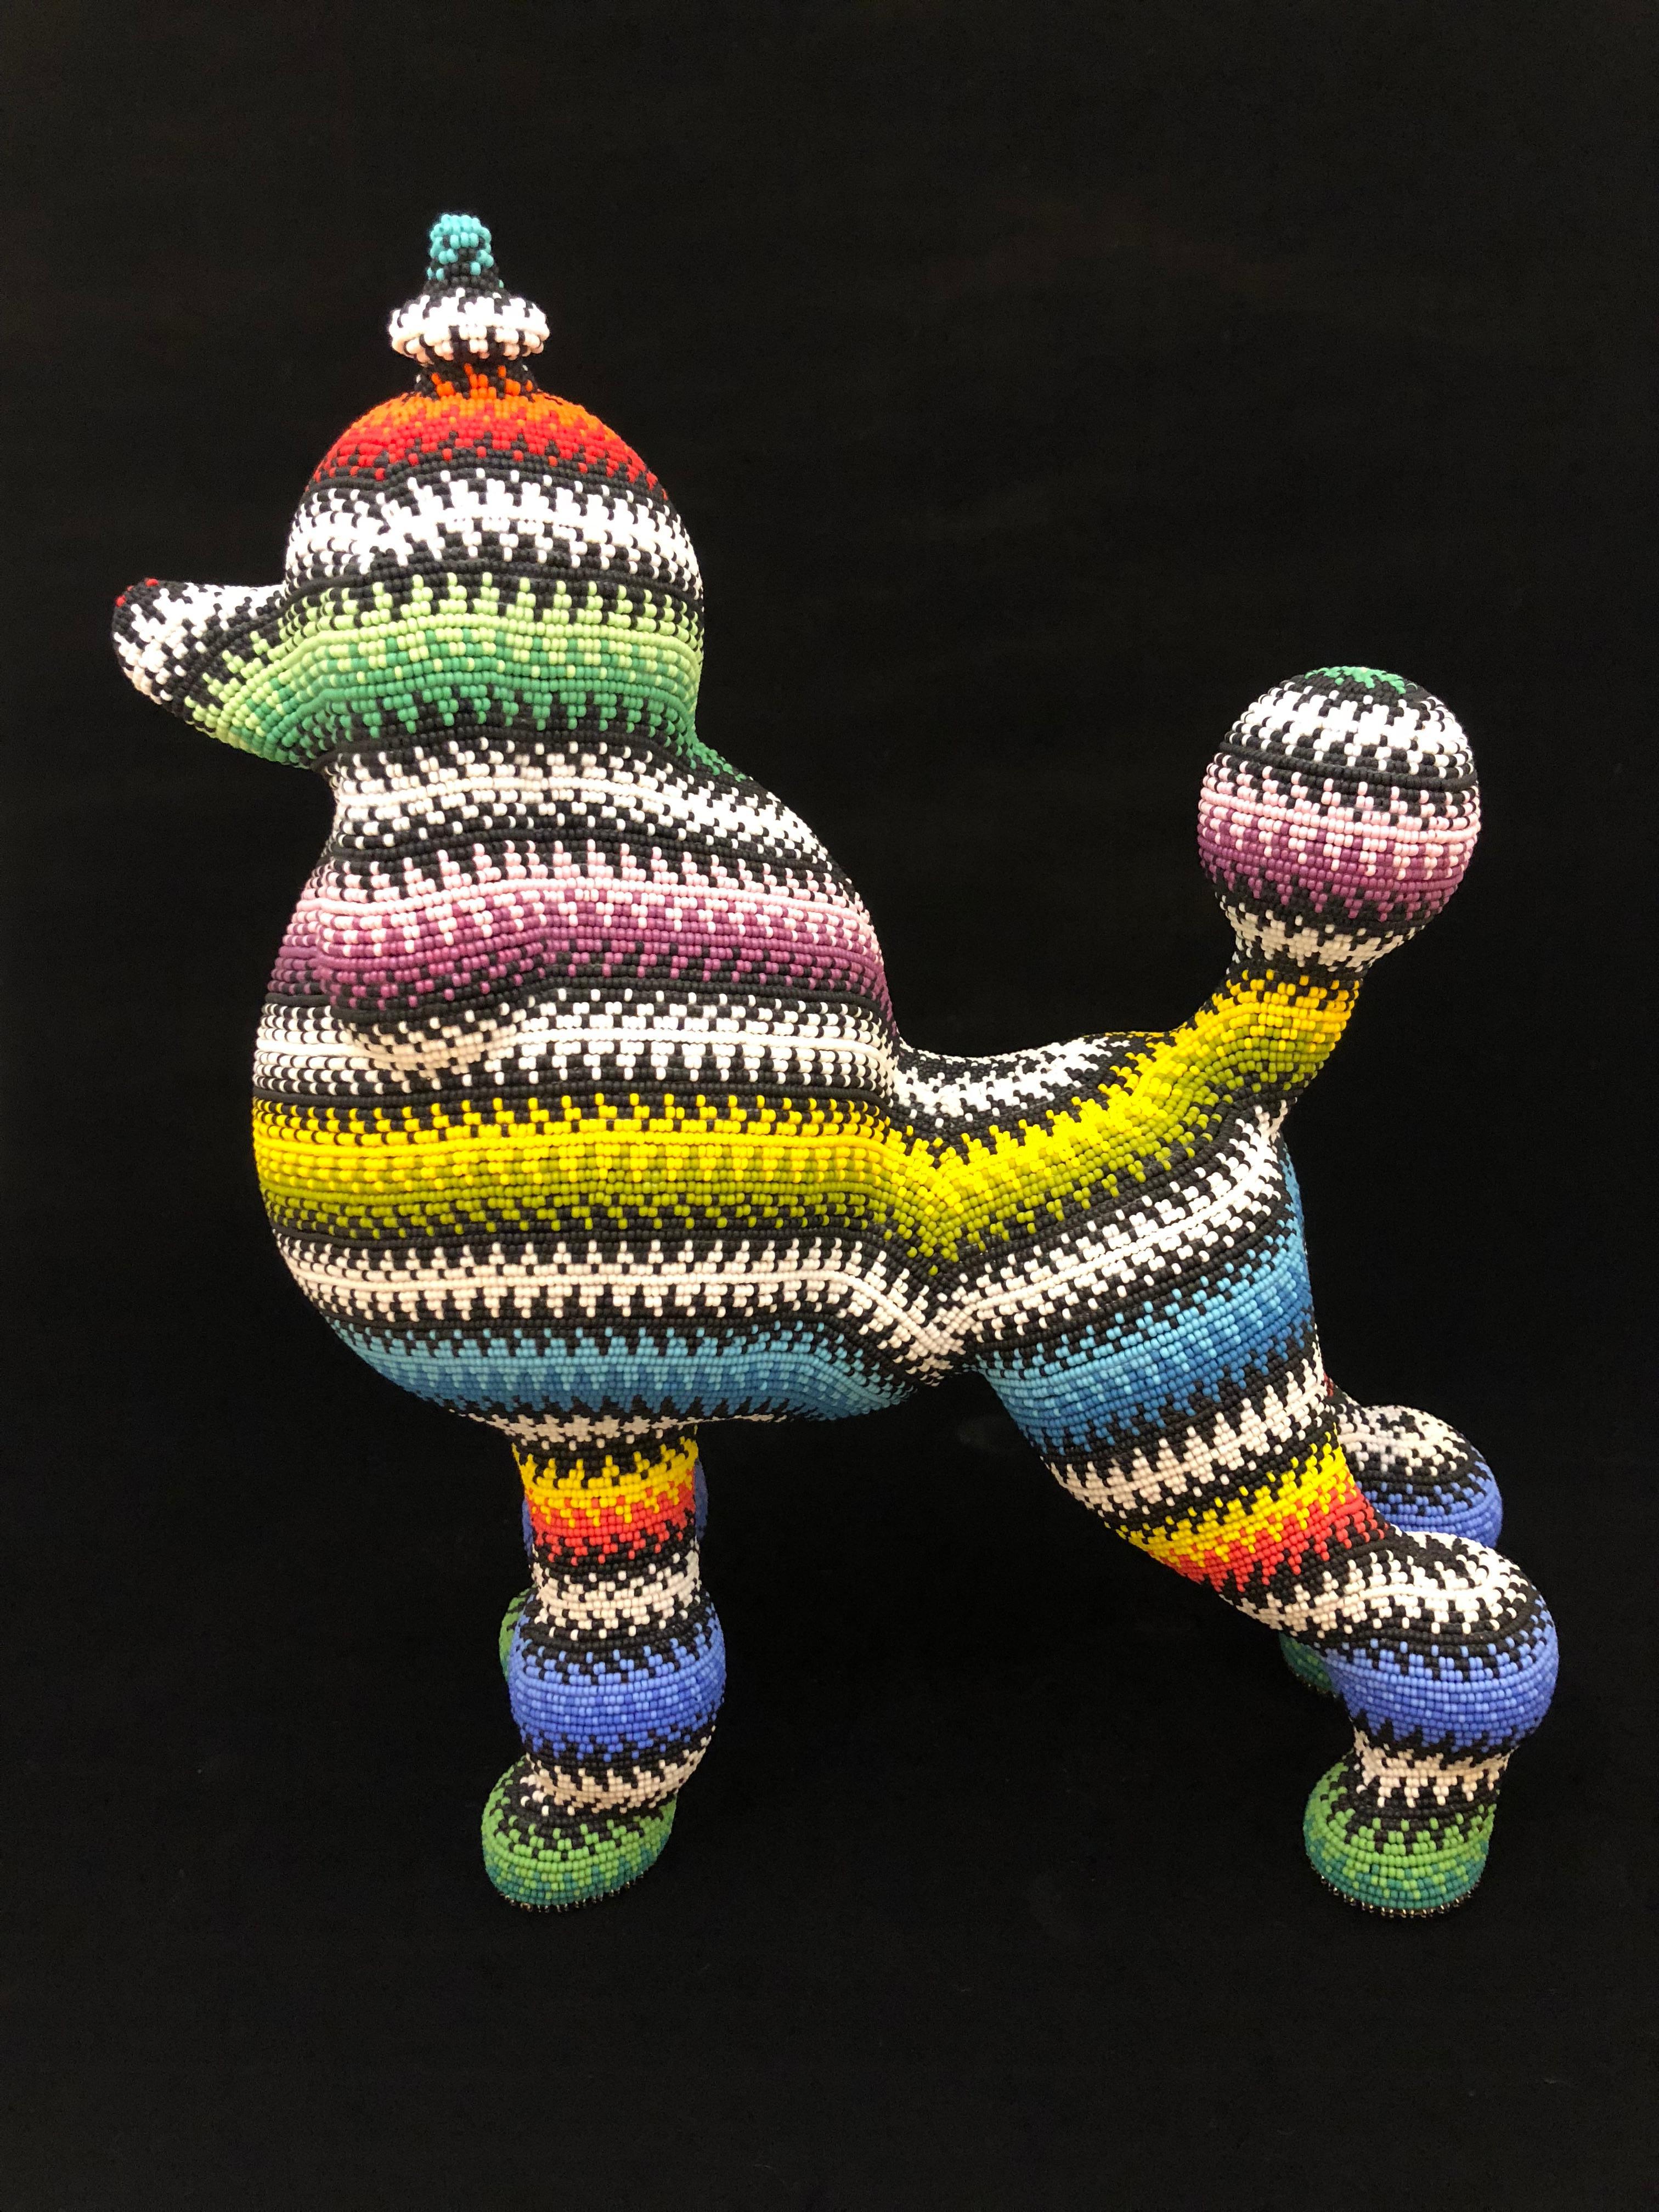 Poodle Form Covered in Glass Czech Seed Beads - Pop Art Sculpture by Jan Huling